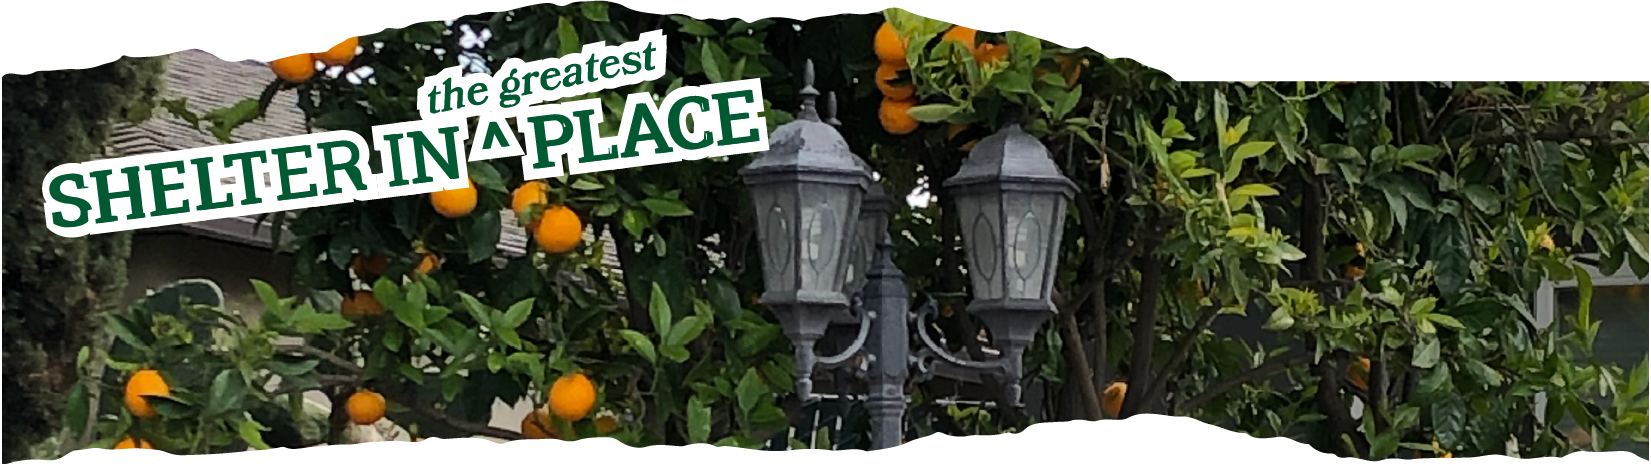 Title: Shelter in the Greatest Place laid over a photo of an old fashioned double sided lamp post being engulfed by an orange tree ladened with fruit.